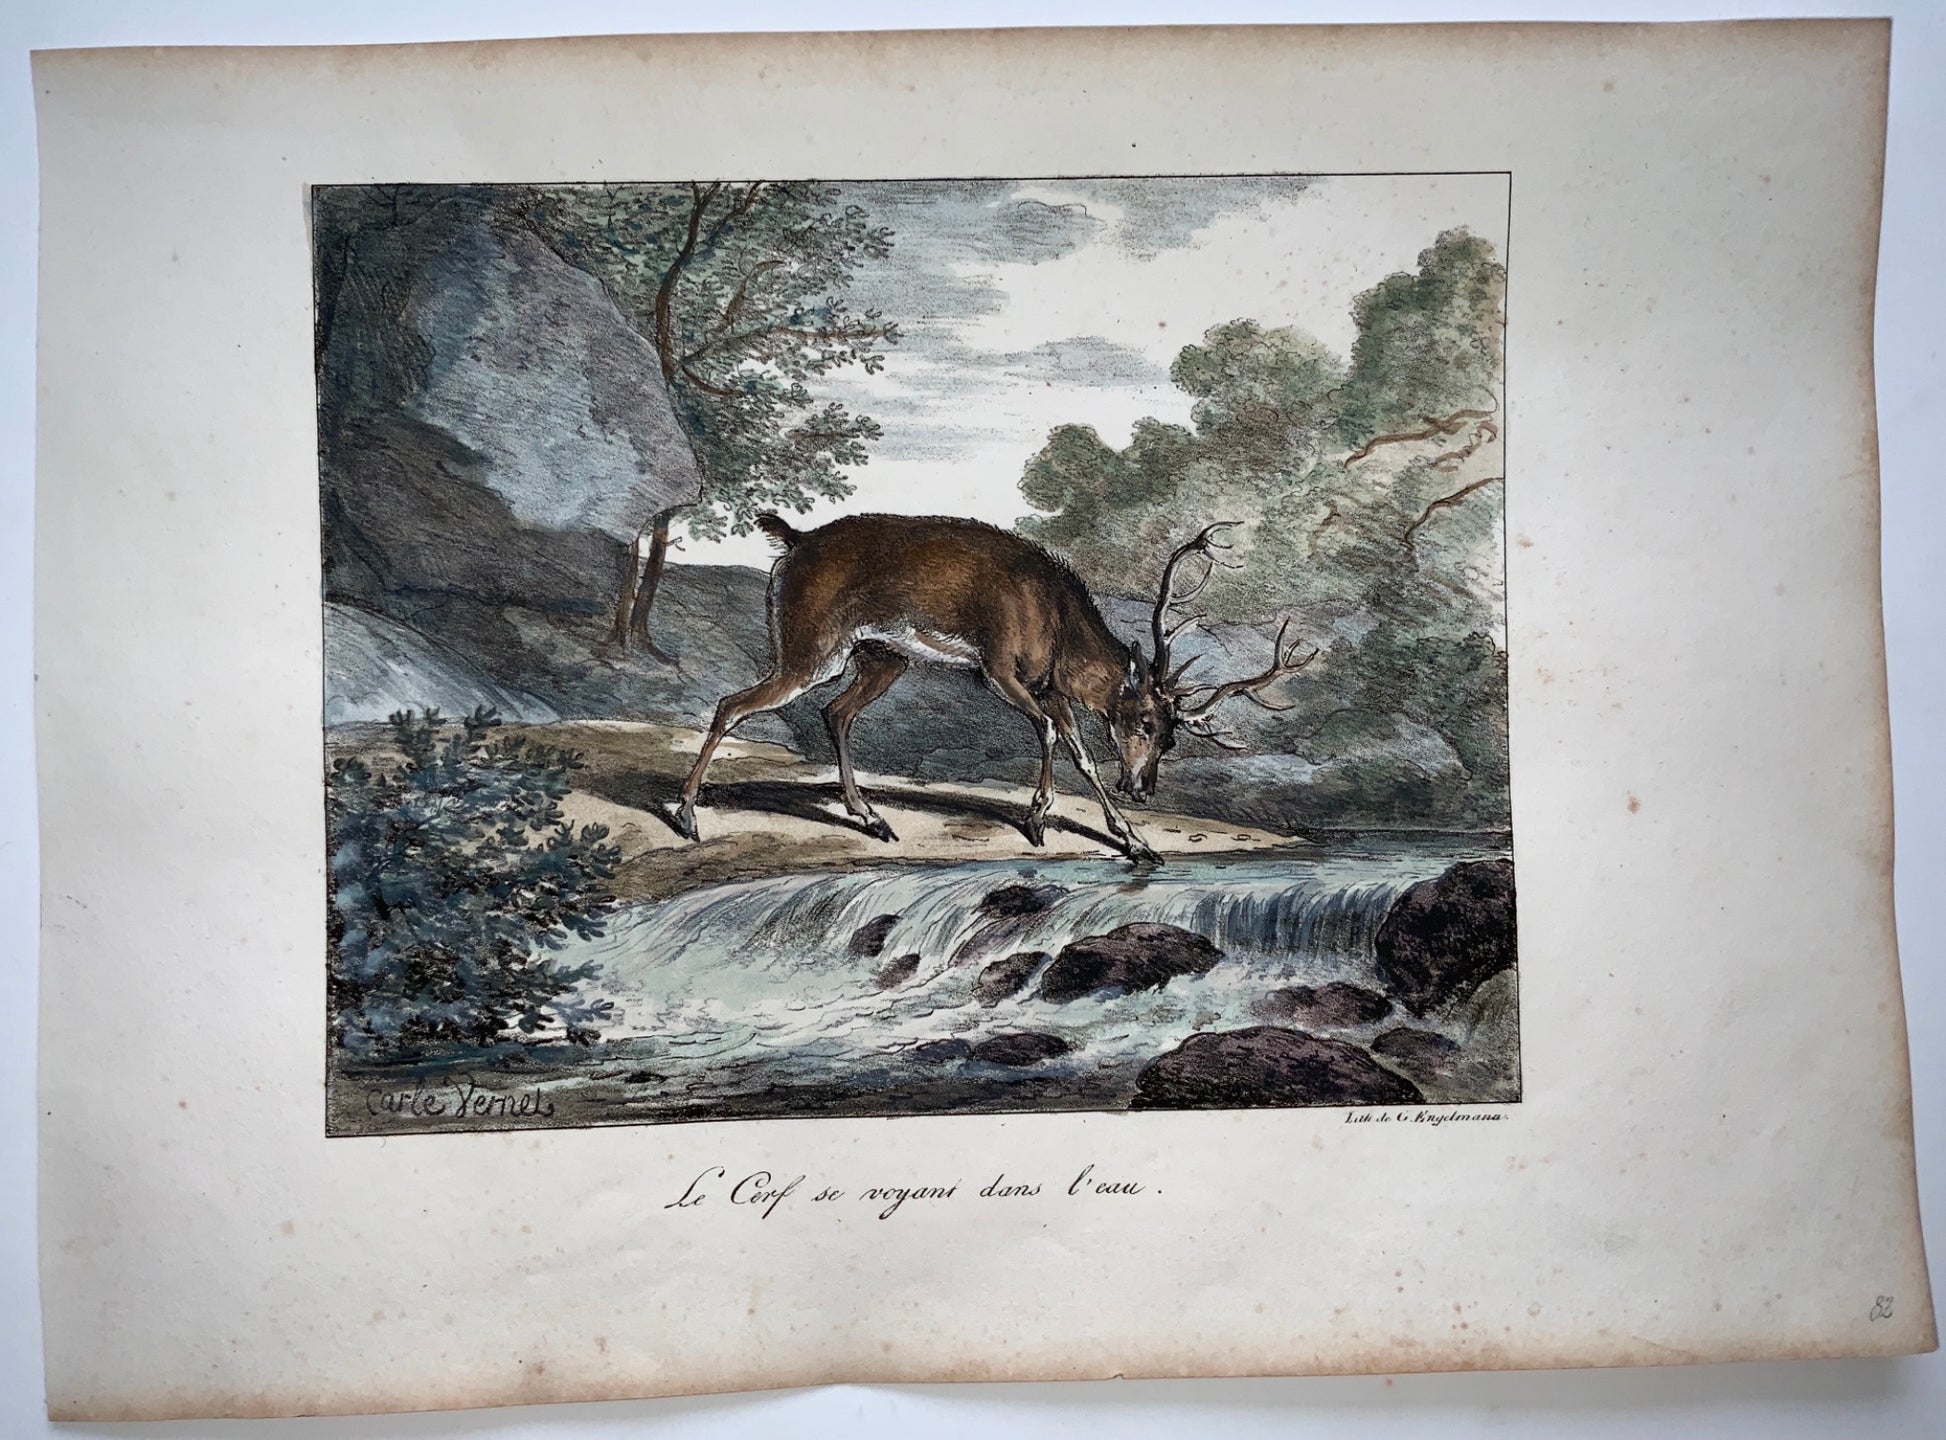 Carle Vernet (1758-1835) - INCUNABULA OF LITHOGRAPHY G. Engelmann - The Stag - Fable